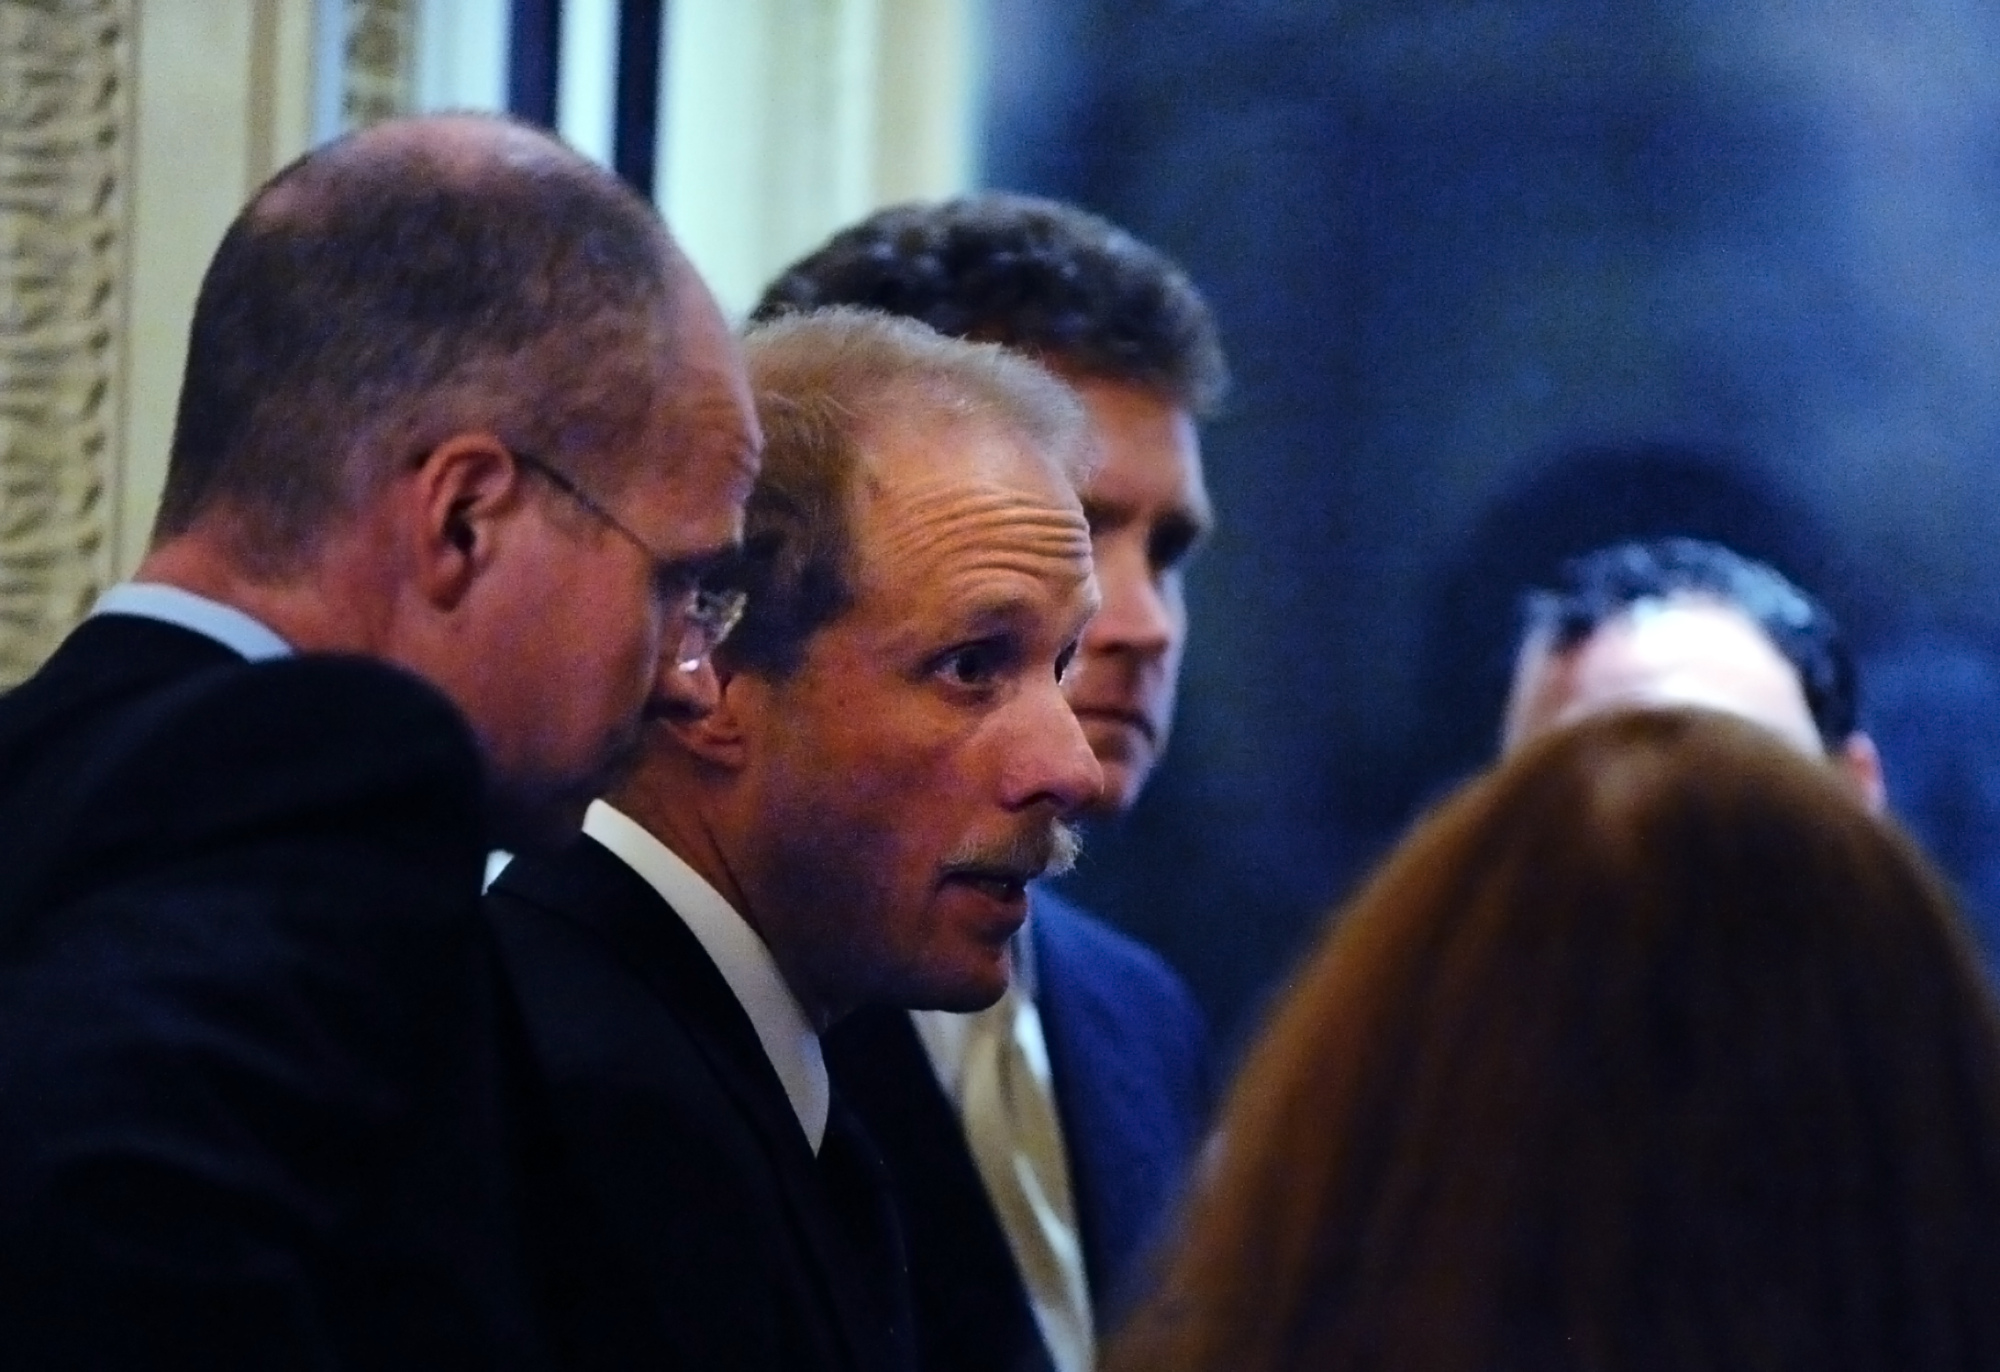 Stephen Feinberg convenes with his crew as lawmakers discuss the auto bailout bill at the US Capitol in Washington, D.C., on Dec. 11, 2008.
